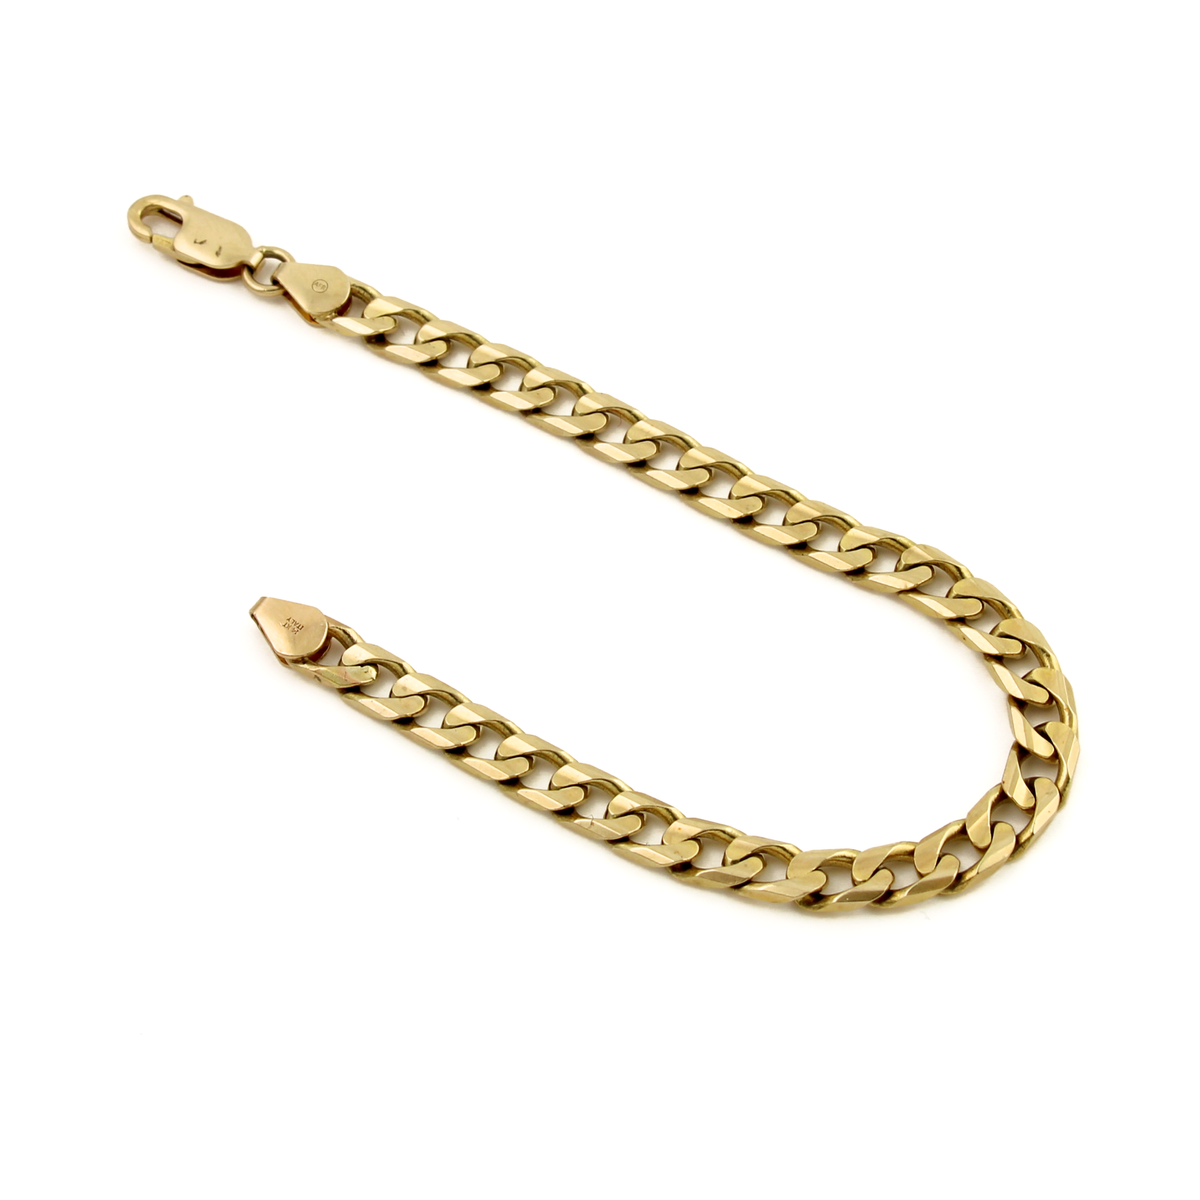 An absolutely, wicked heavy Gold chain bracelet.